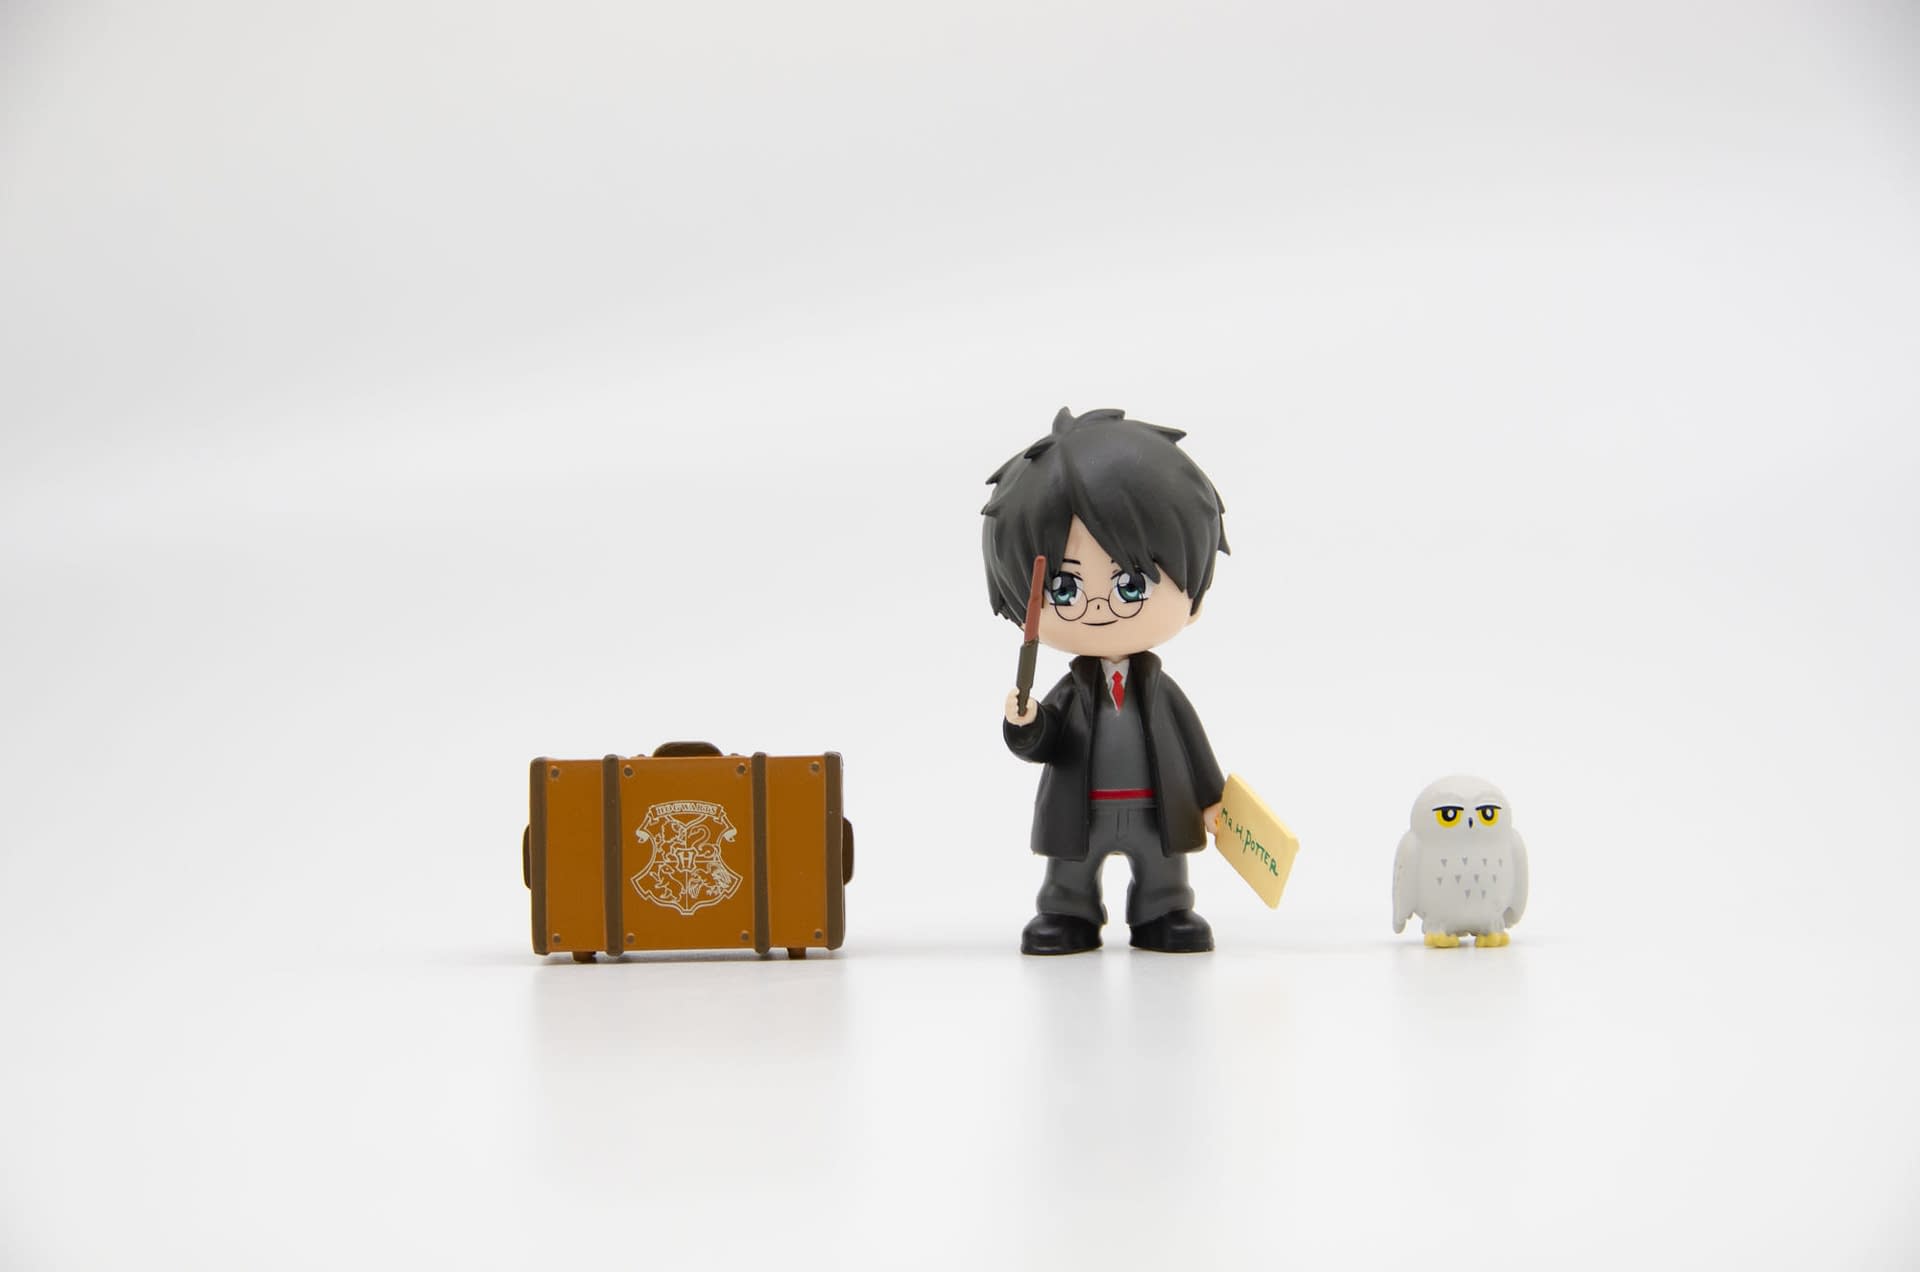 YuMe Harry Potter Capsule Toys Hit Walmart On July 17th